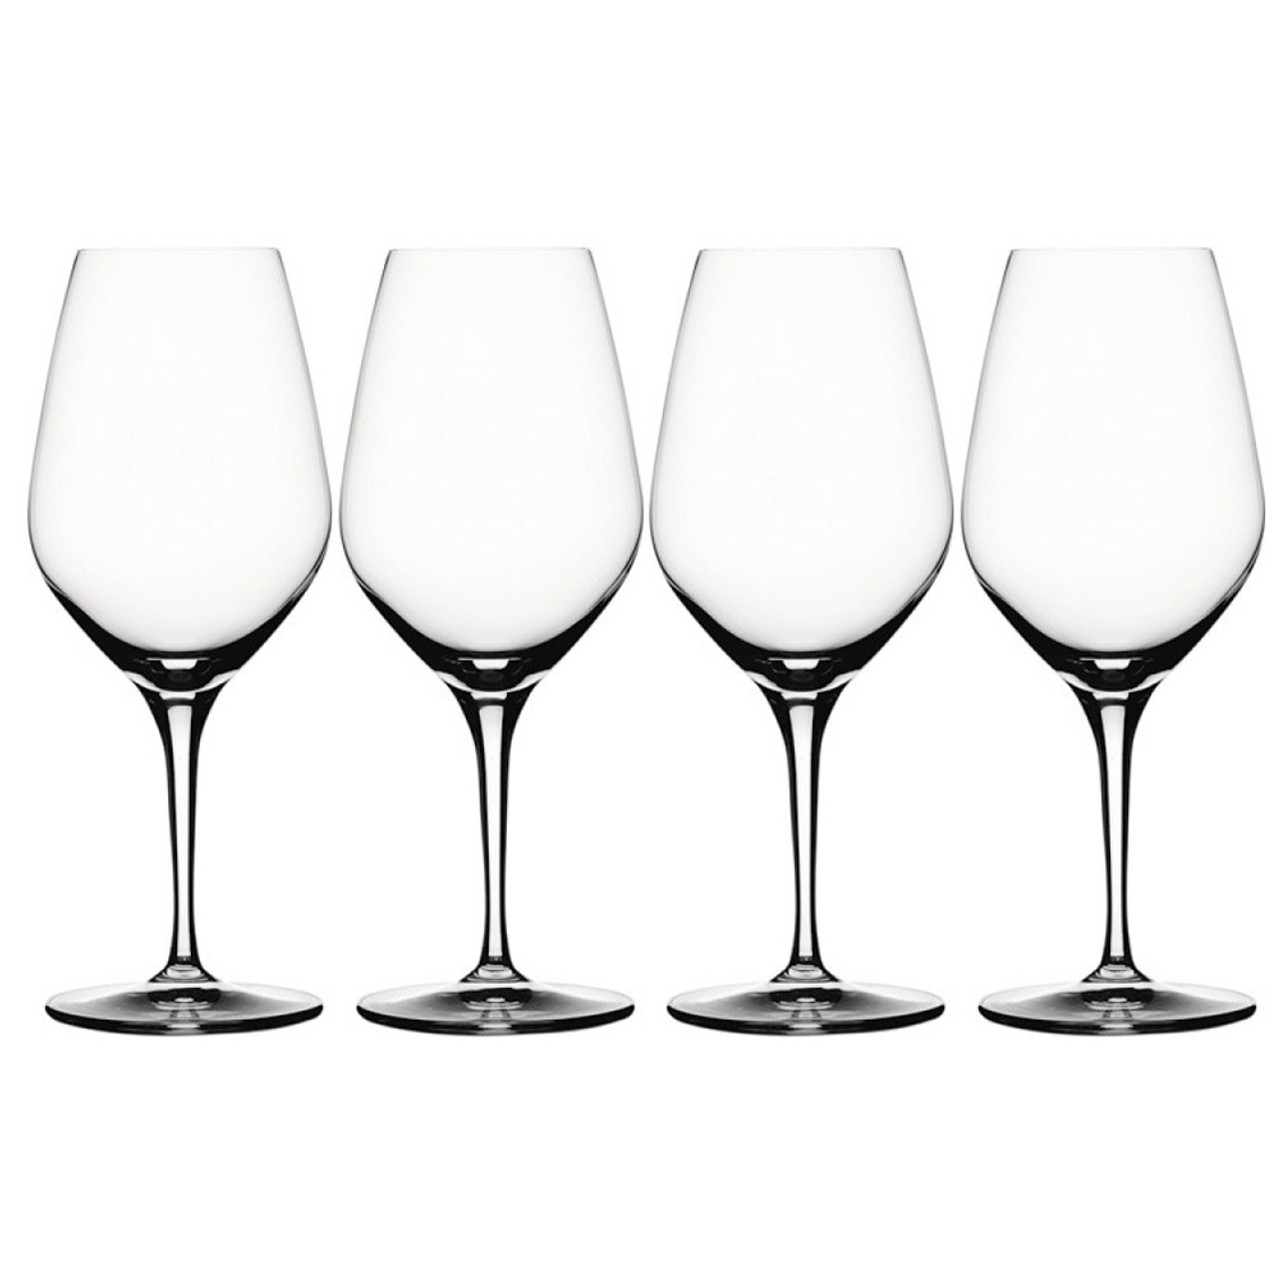 Pair of Spiegelau Patterned White Wine Glasses 